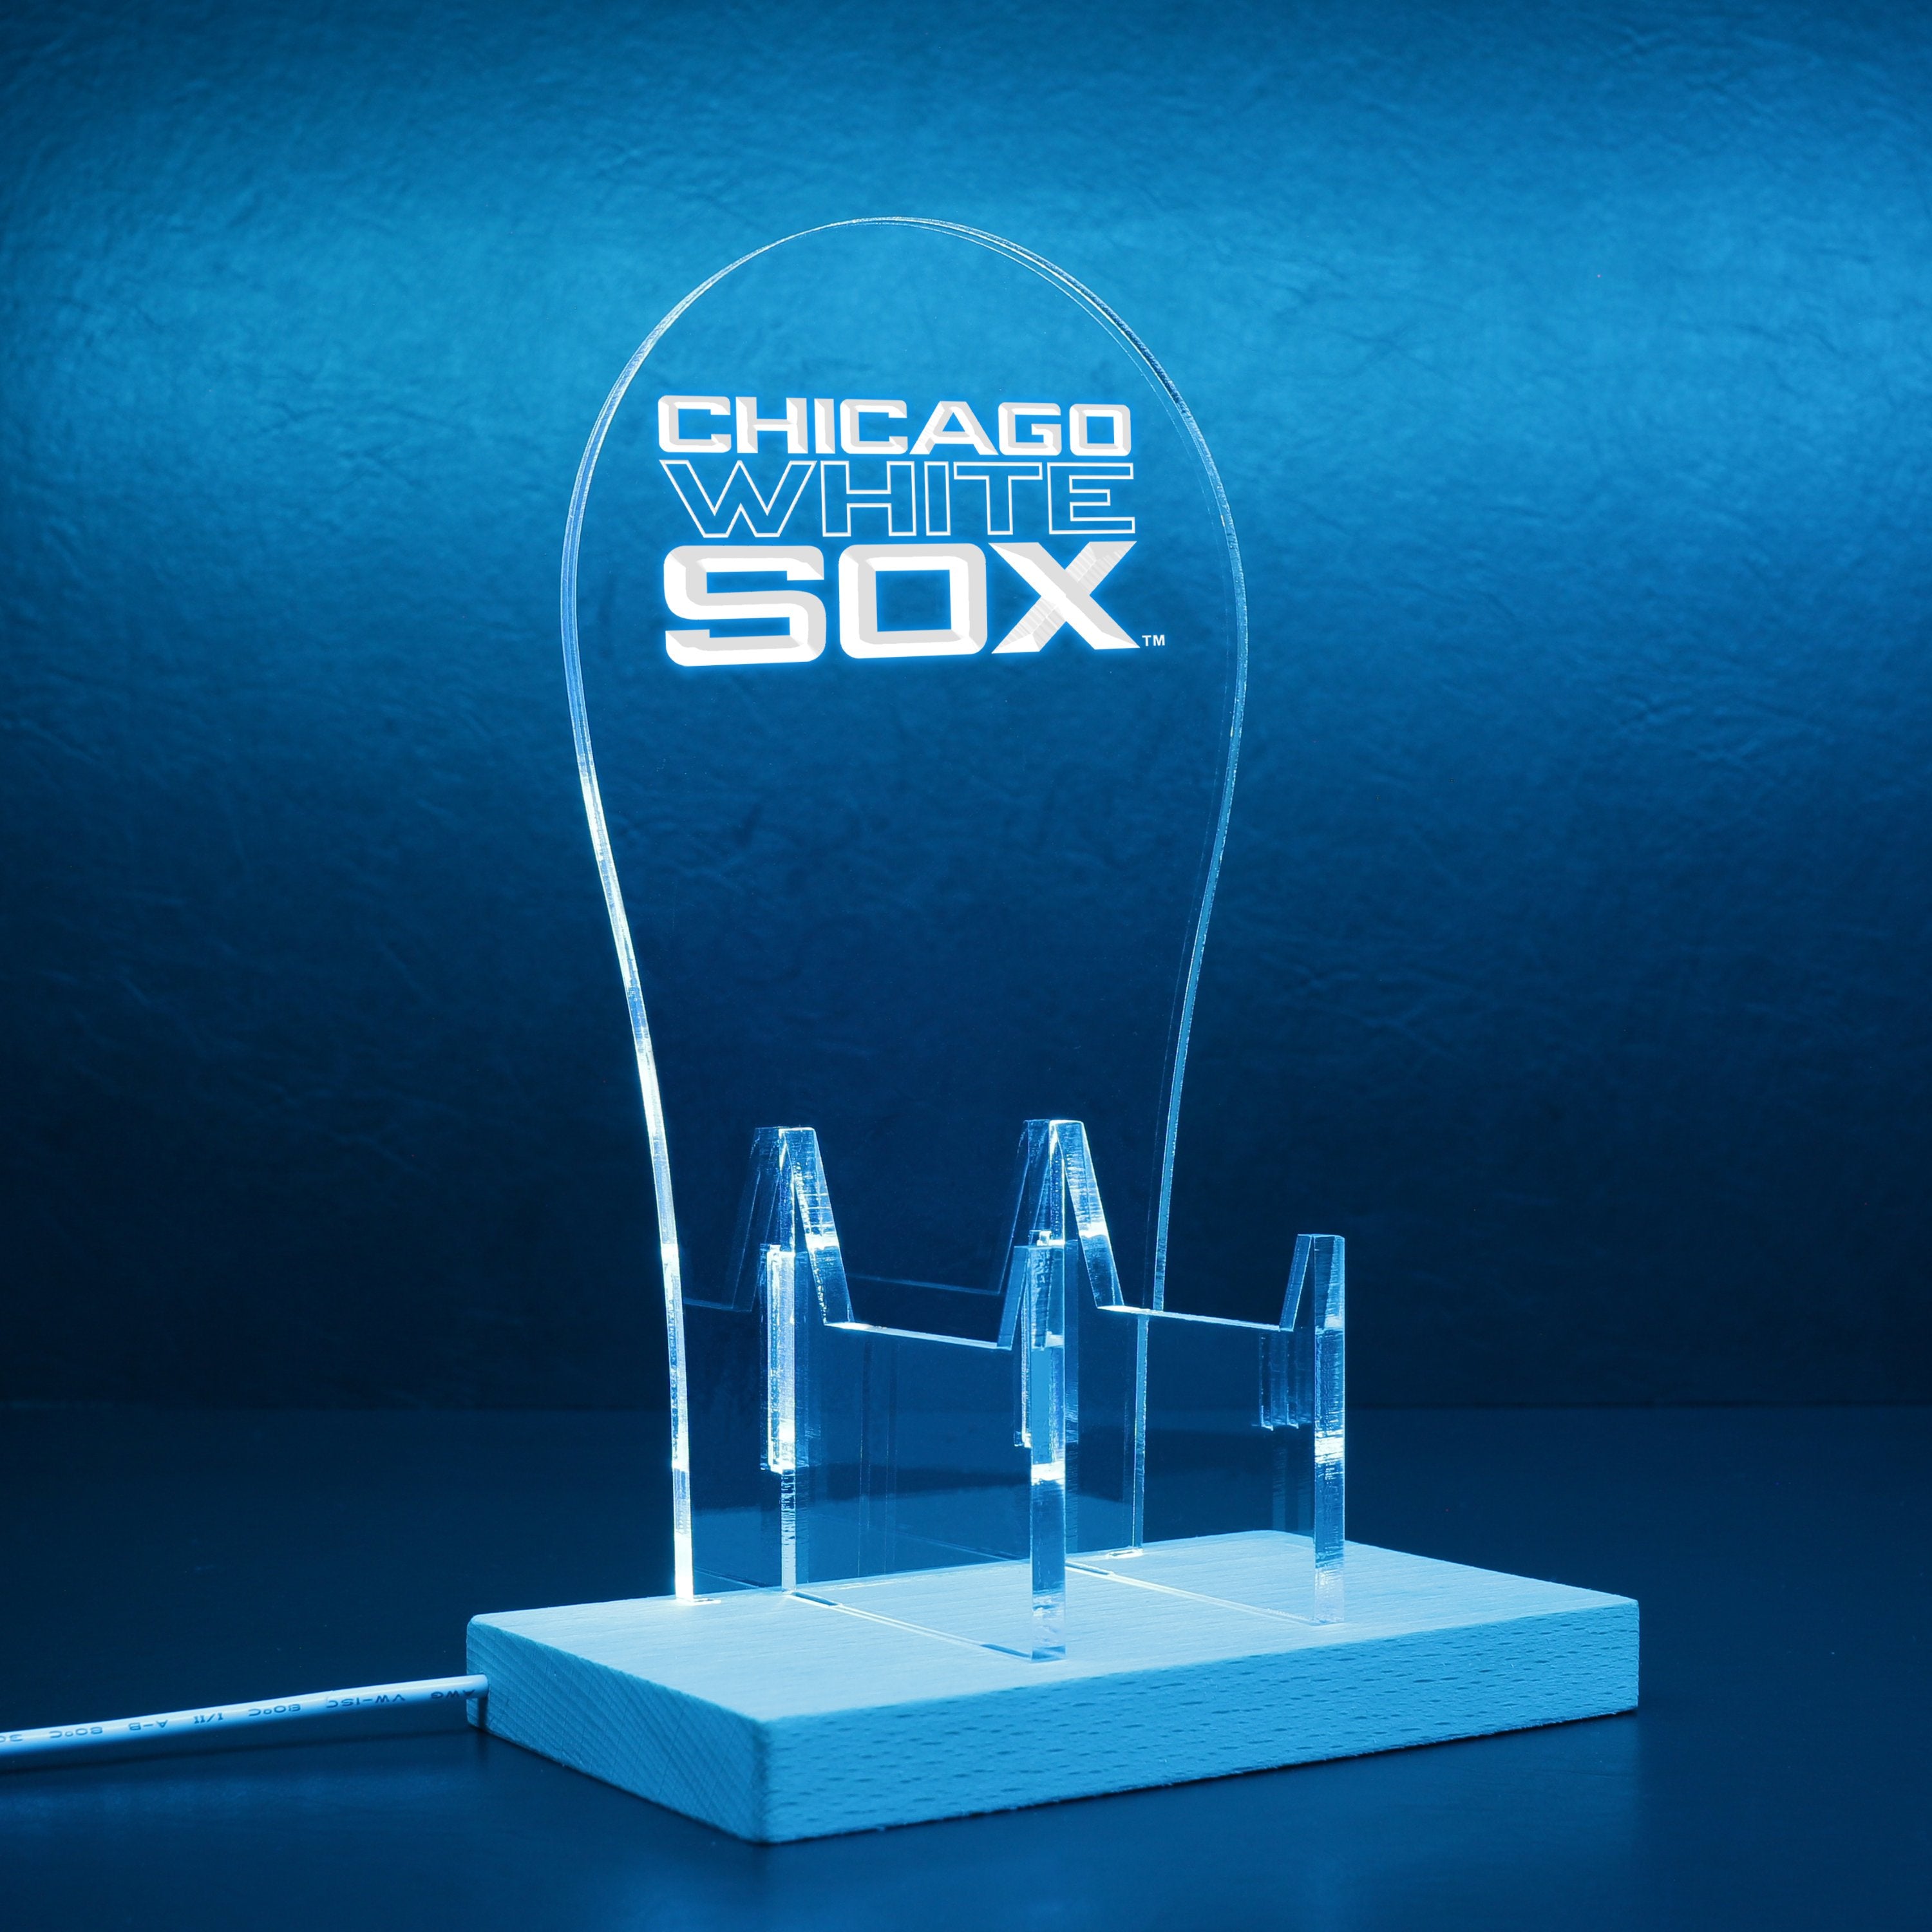 Chicago White Sox Wordmark used in 1991 - Pres RGB LED Gaming Headset Controller Stand